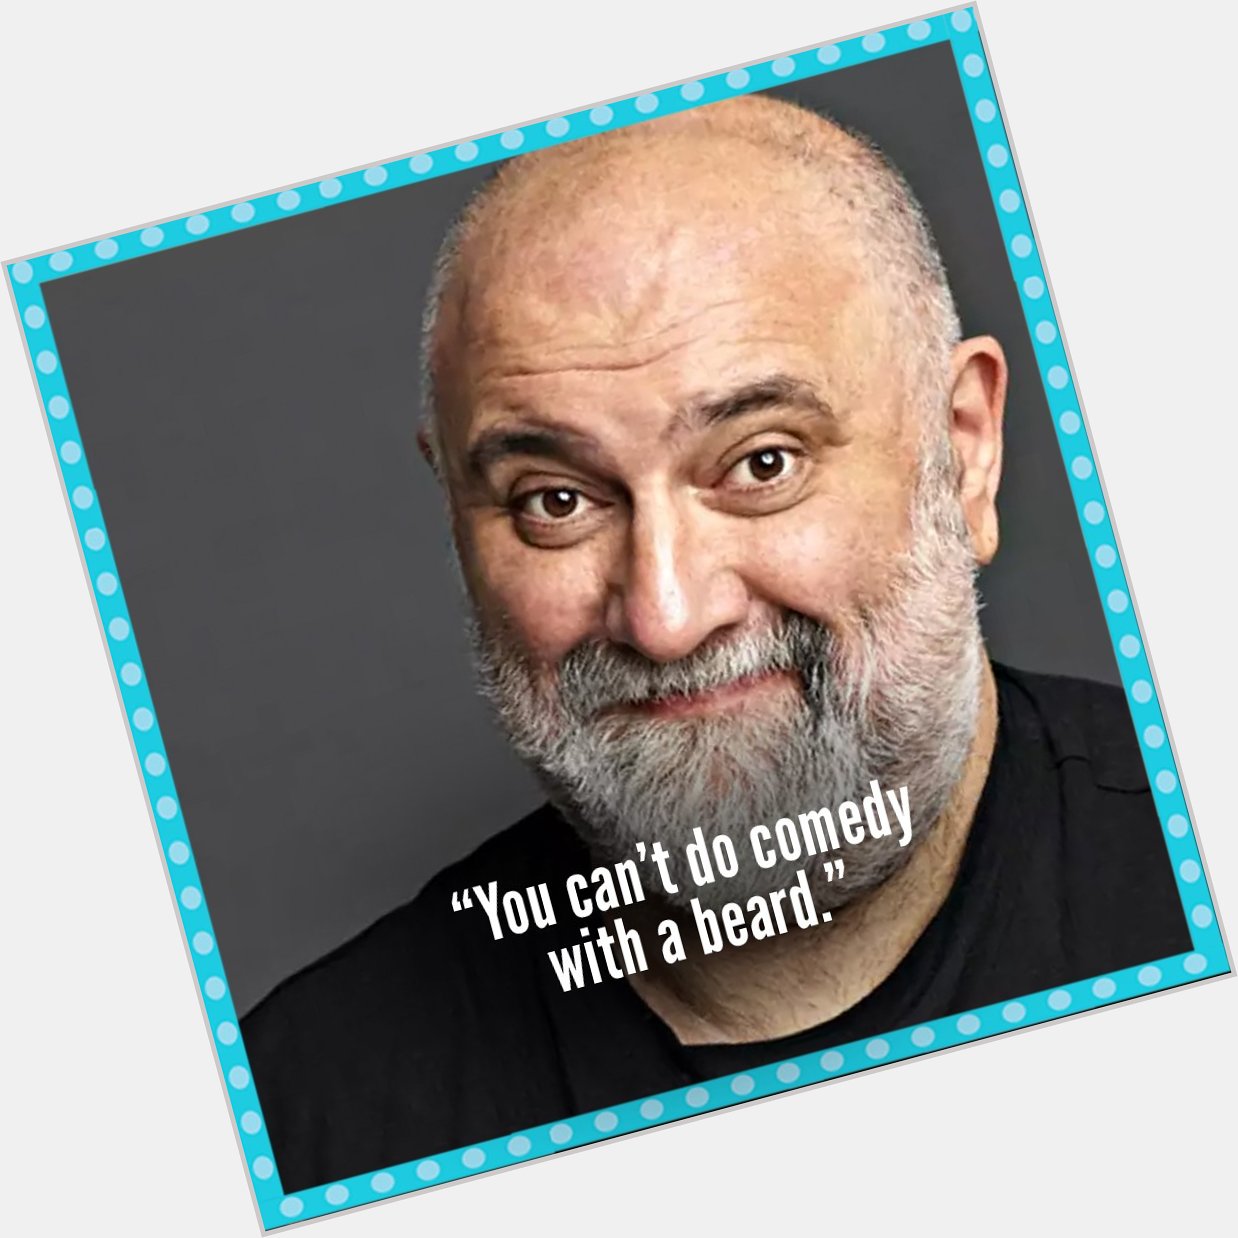 Happy birthday to a real jewel of British comedy, Alexei Sayle. 